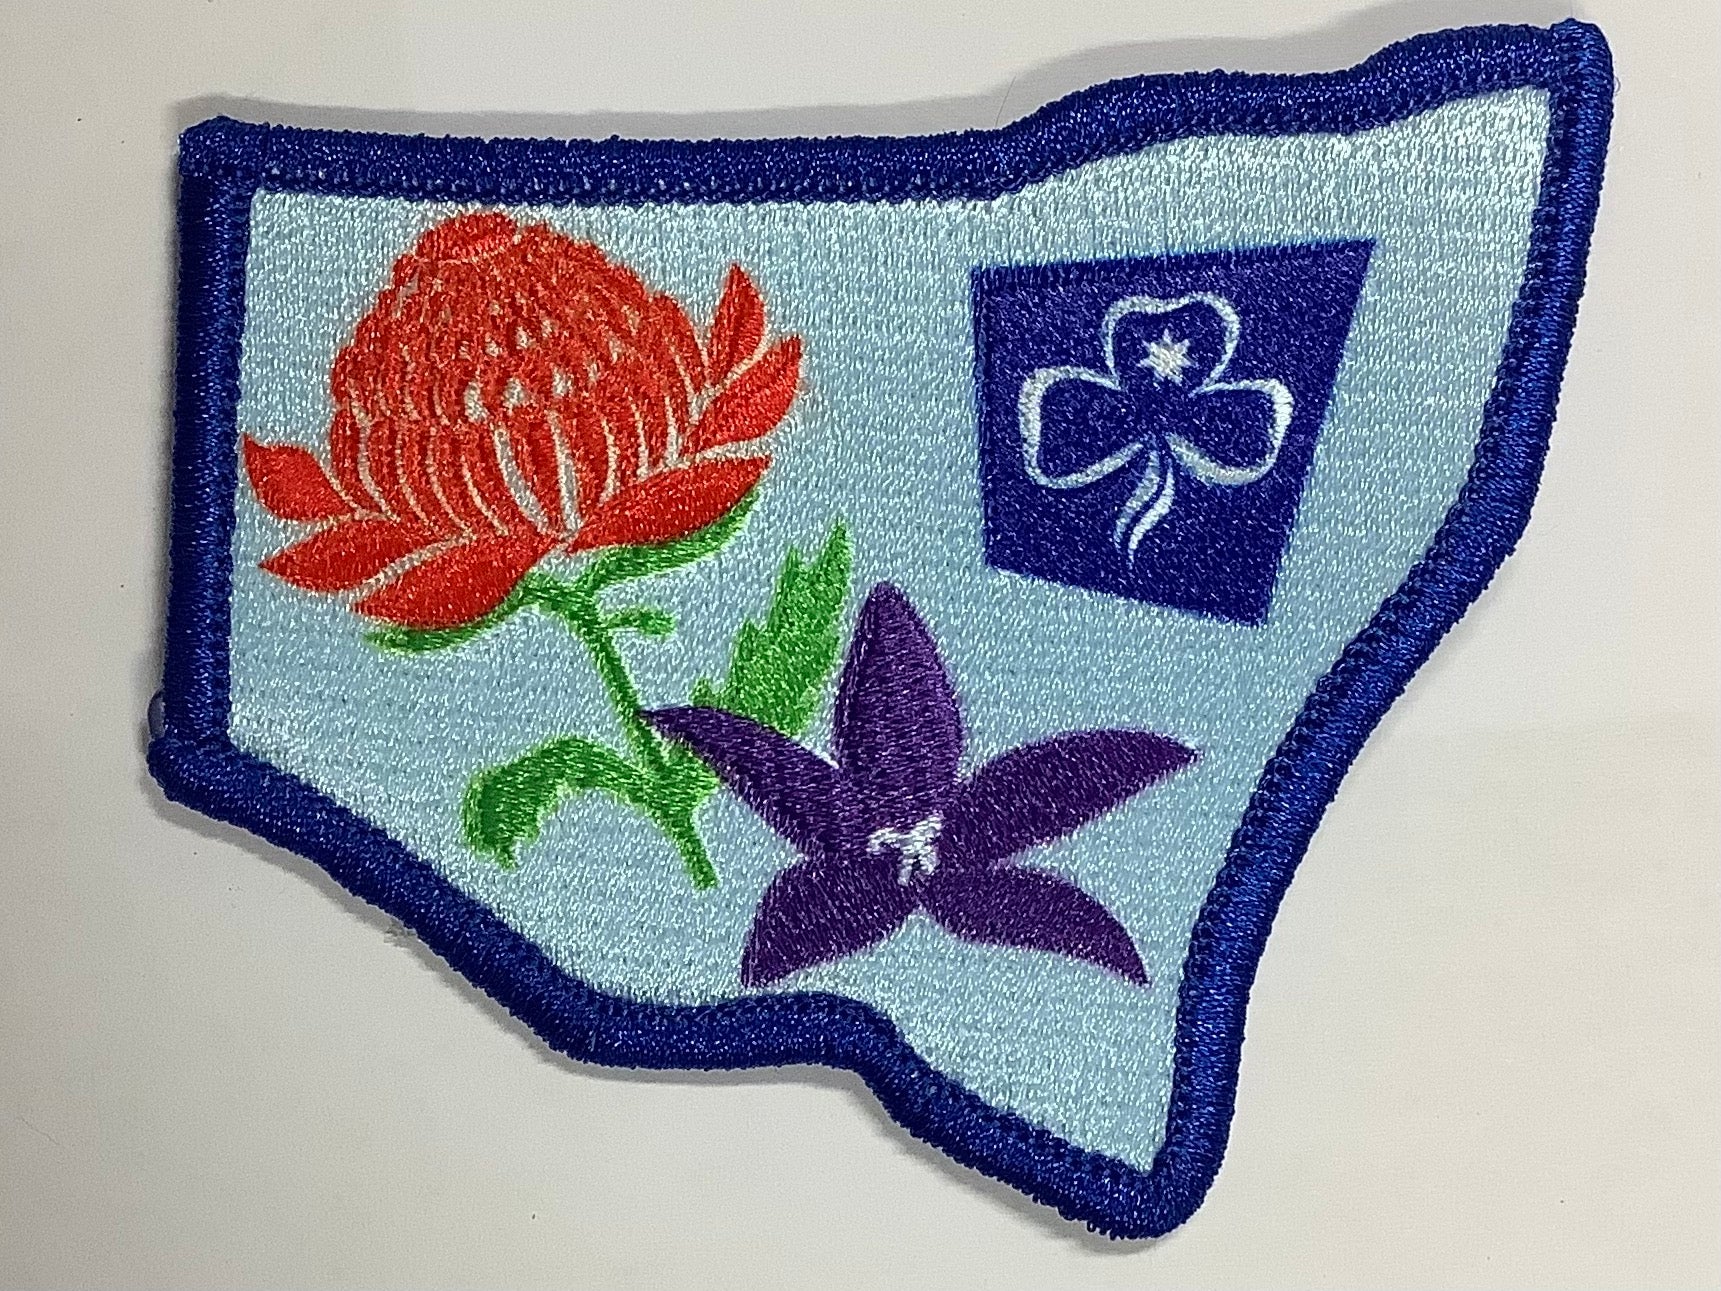 a badge bound in blue in the shape of NSW with the NSW & ACT floral emblem and the trefoil